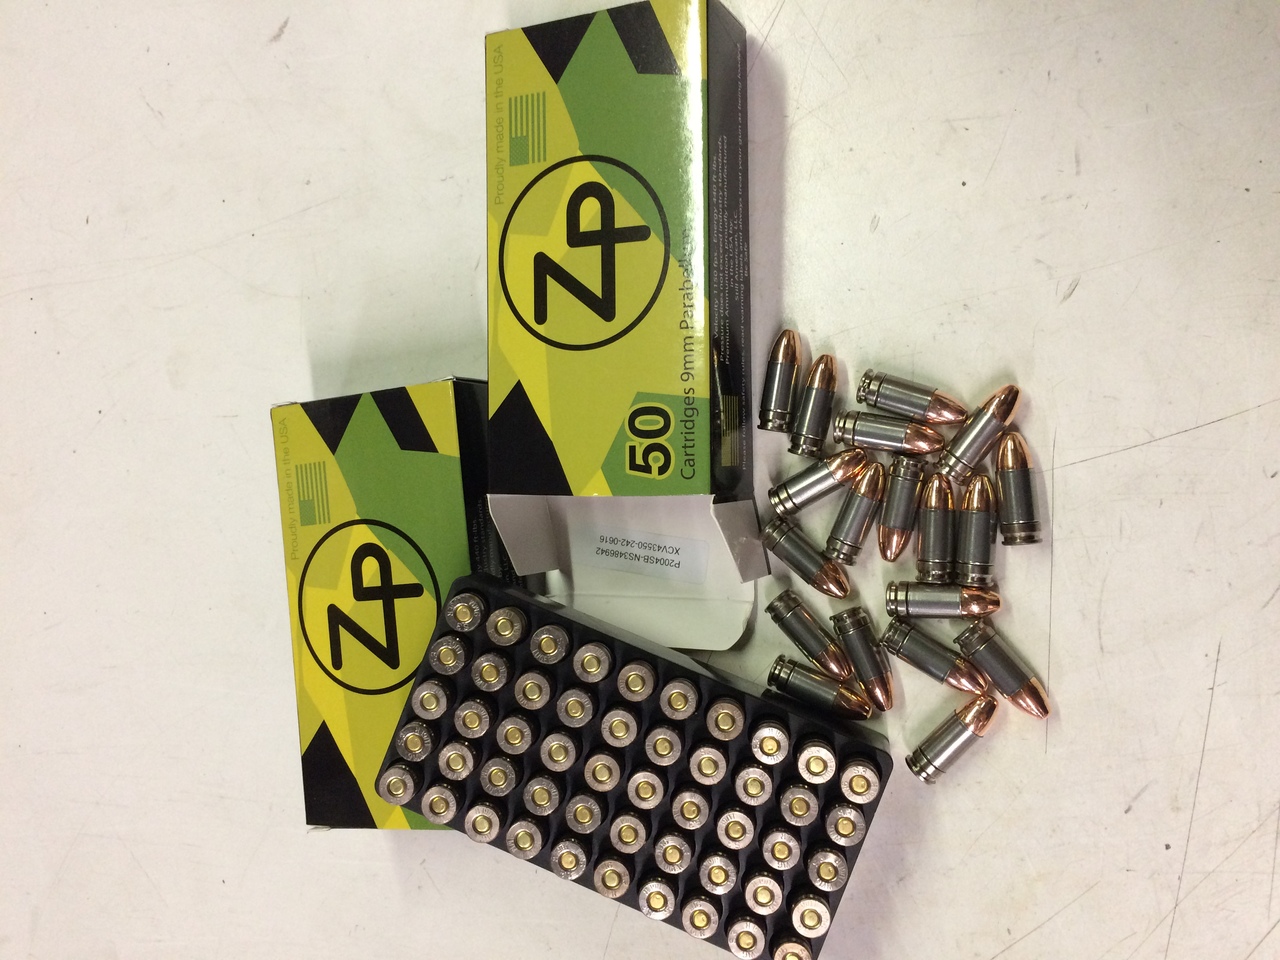 9MM 115 Grain TMJ NAS3 BOX of 50 Rounds.